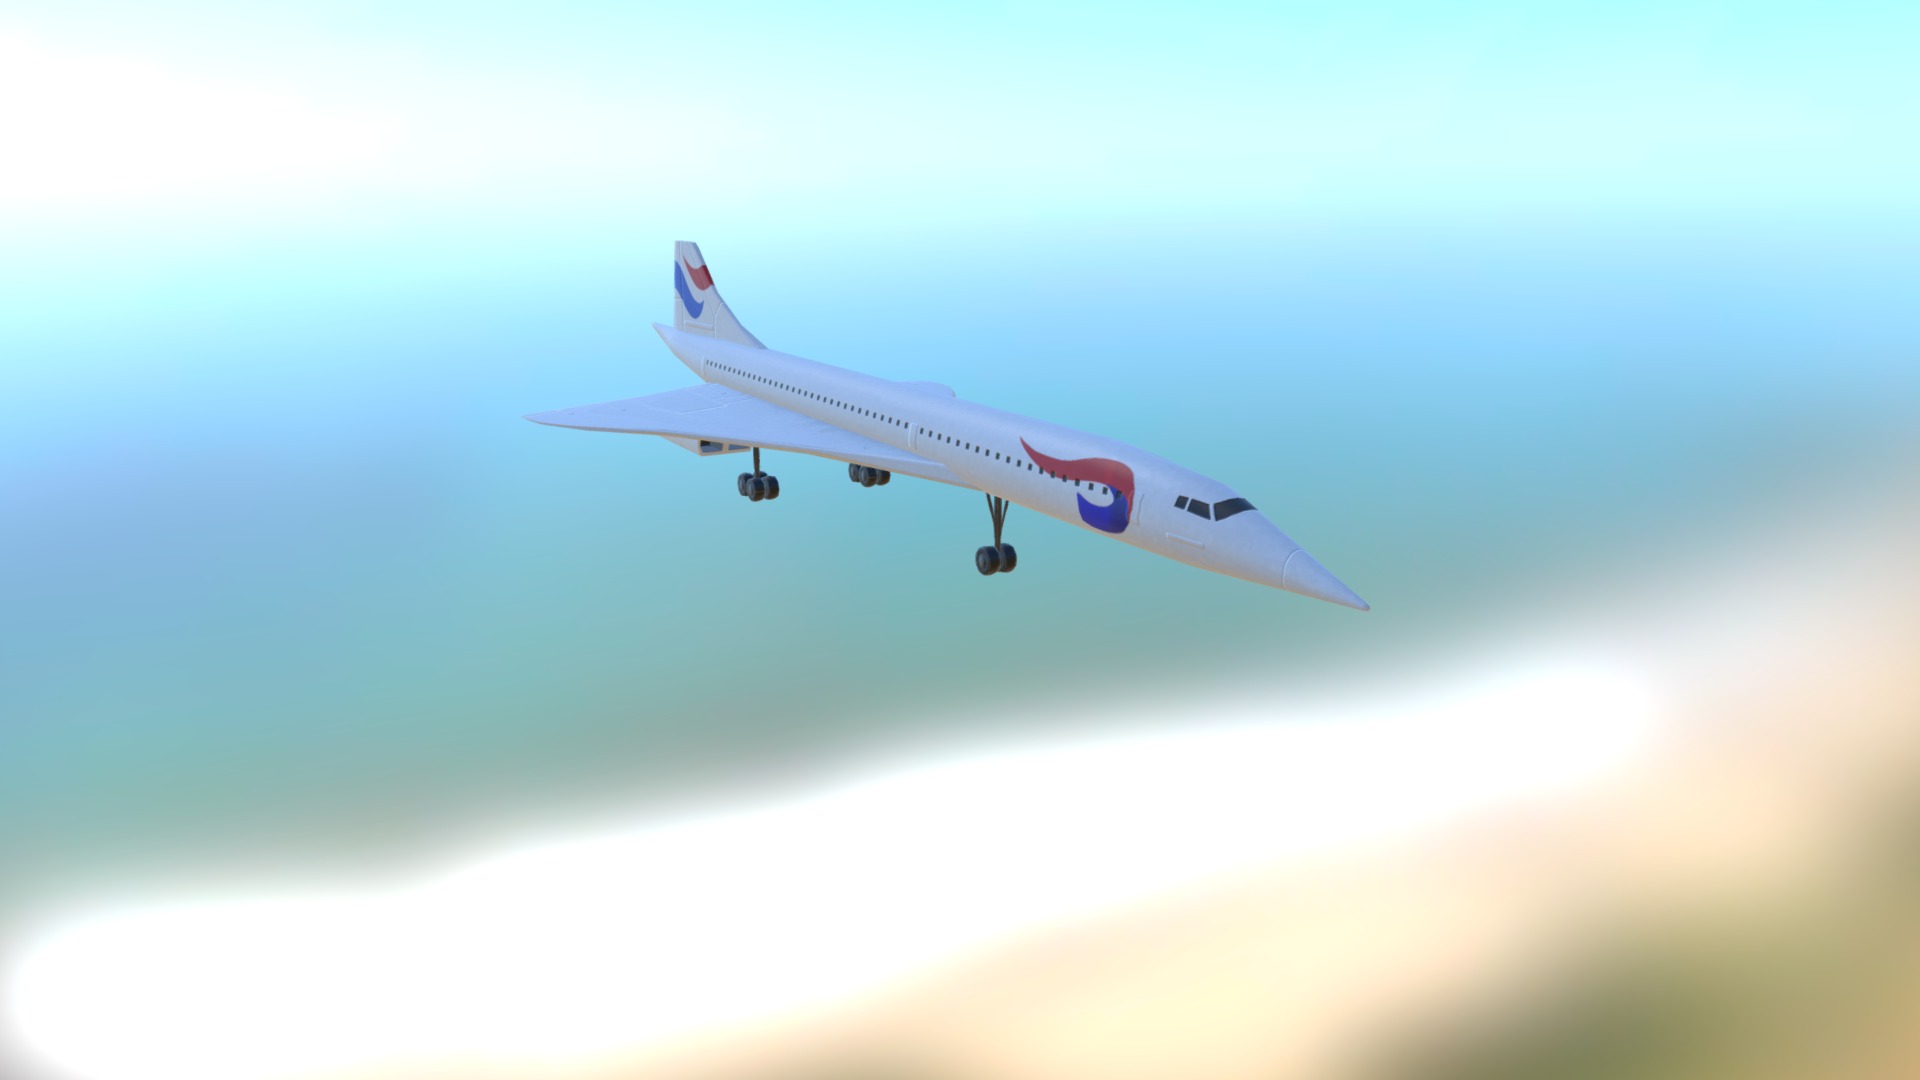 3D model Concorde - This is a 3D model of the Concorde. The 3D model is about a plane flying in the sky.